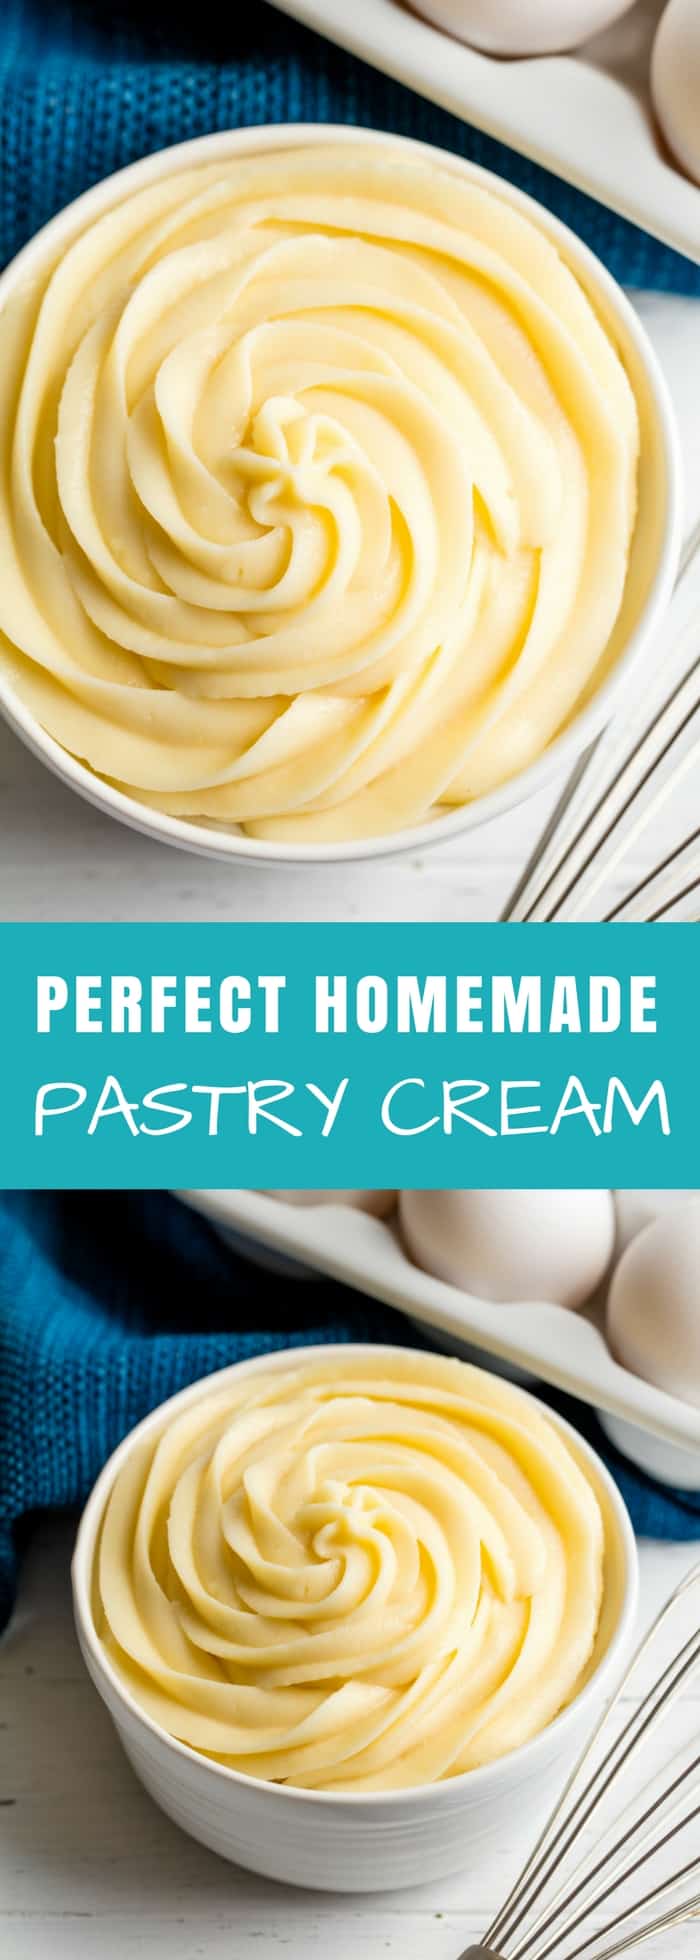 Perfect Pastry Cream is easy to make at home and is used in the most delicious pastries, cakes, and other desserts. You'll love this recipe for perfect French Creme Patissiere every single time. 